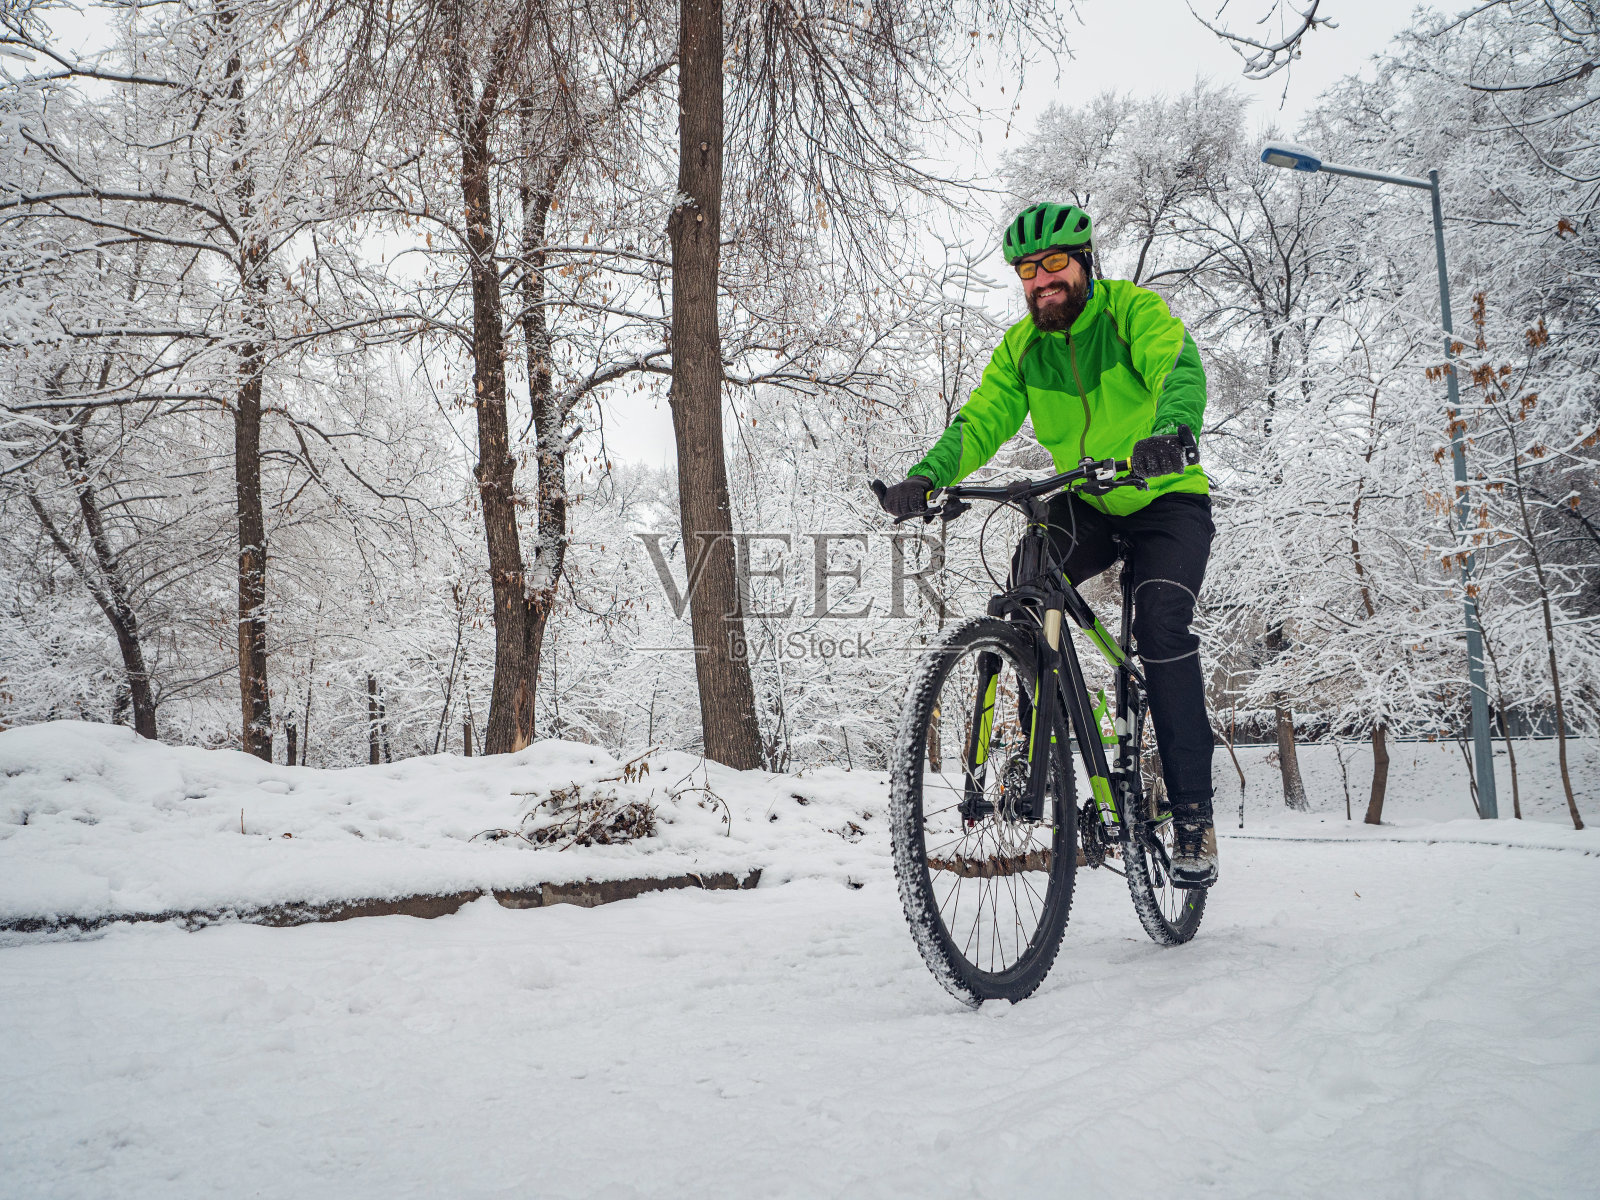 Mountain Biking in the Snow | Best Pictures in the World